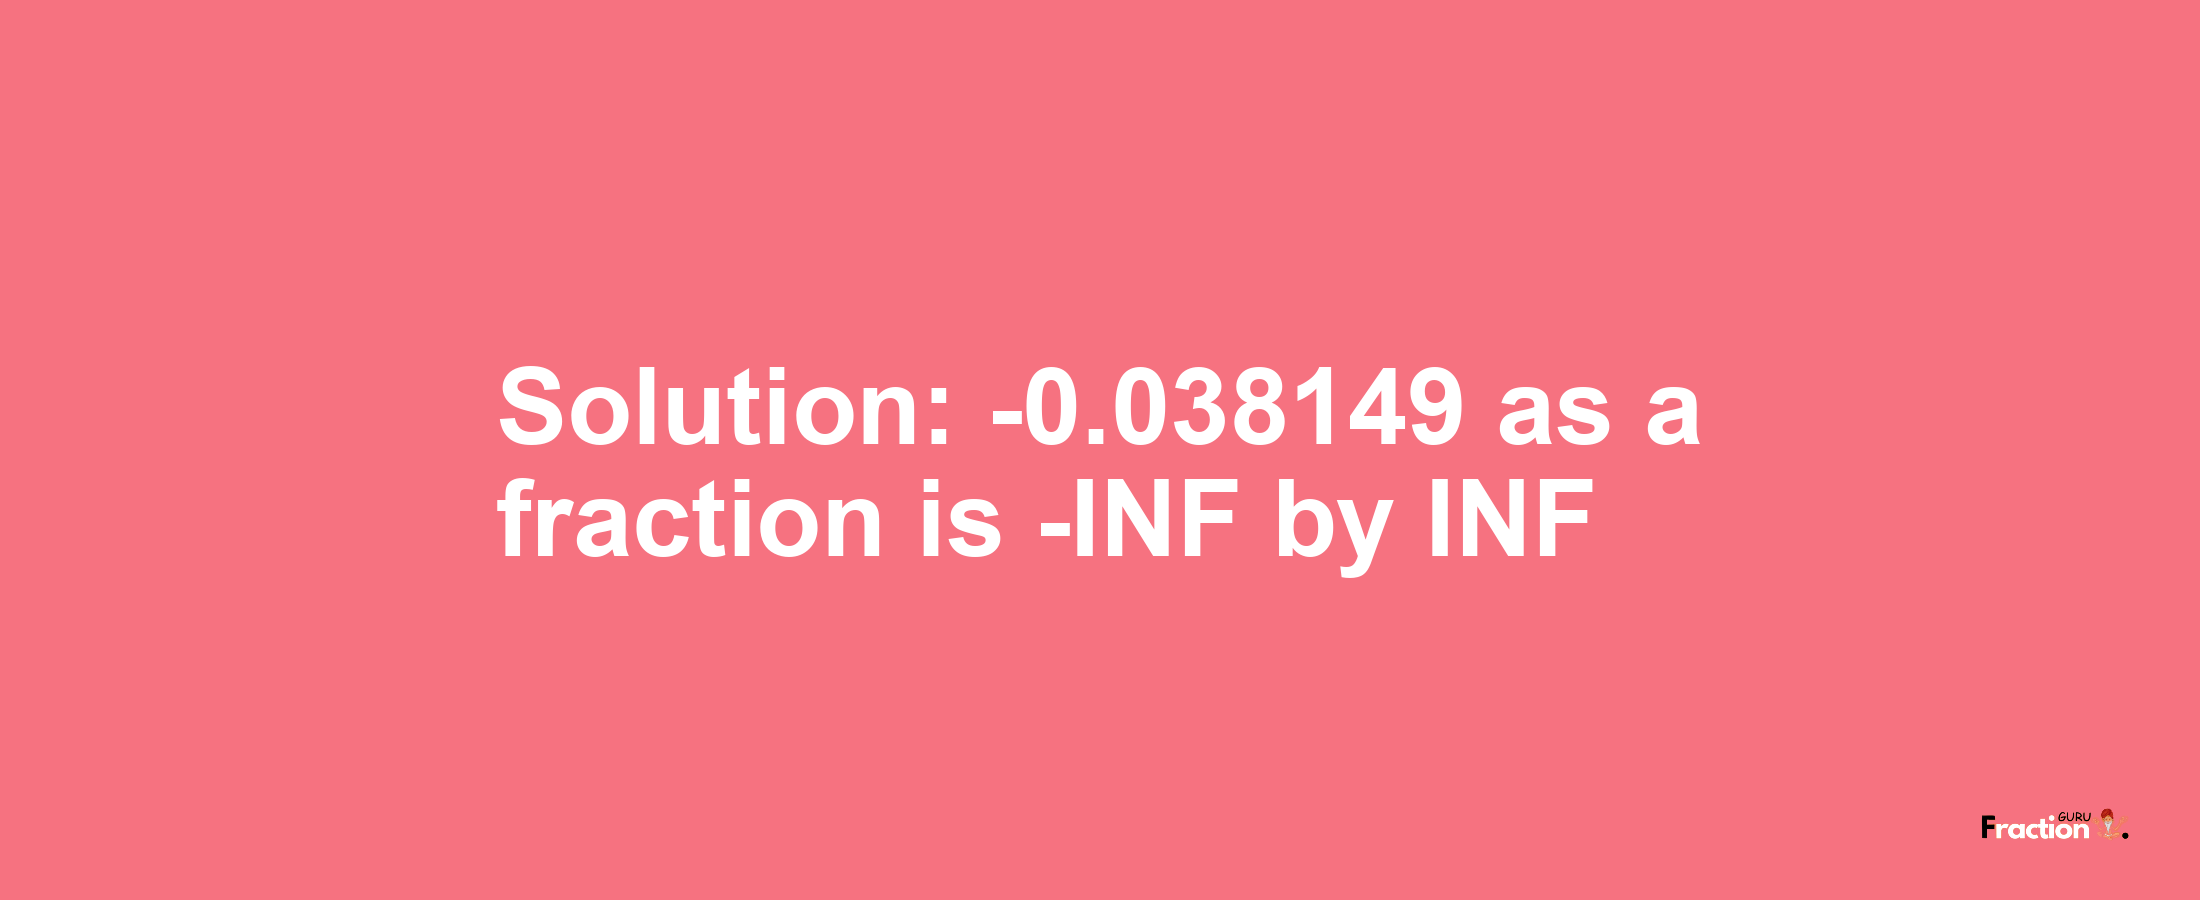 Solution:-0.038149 as a fraction is -INF/INF